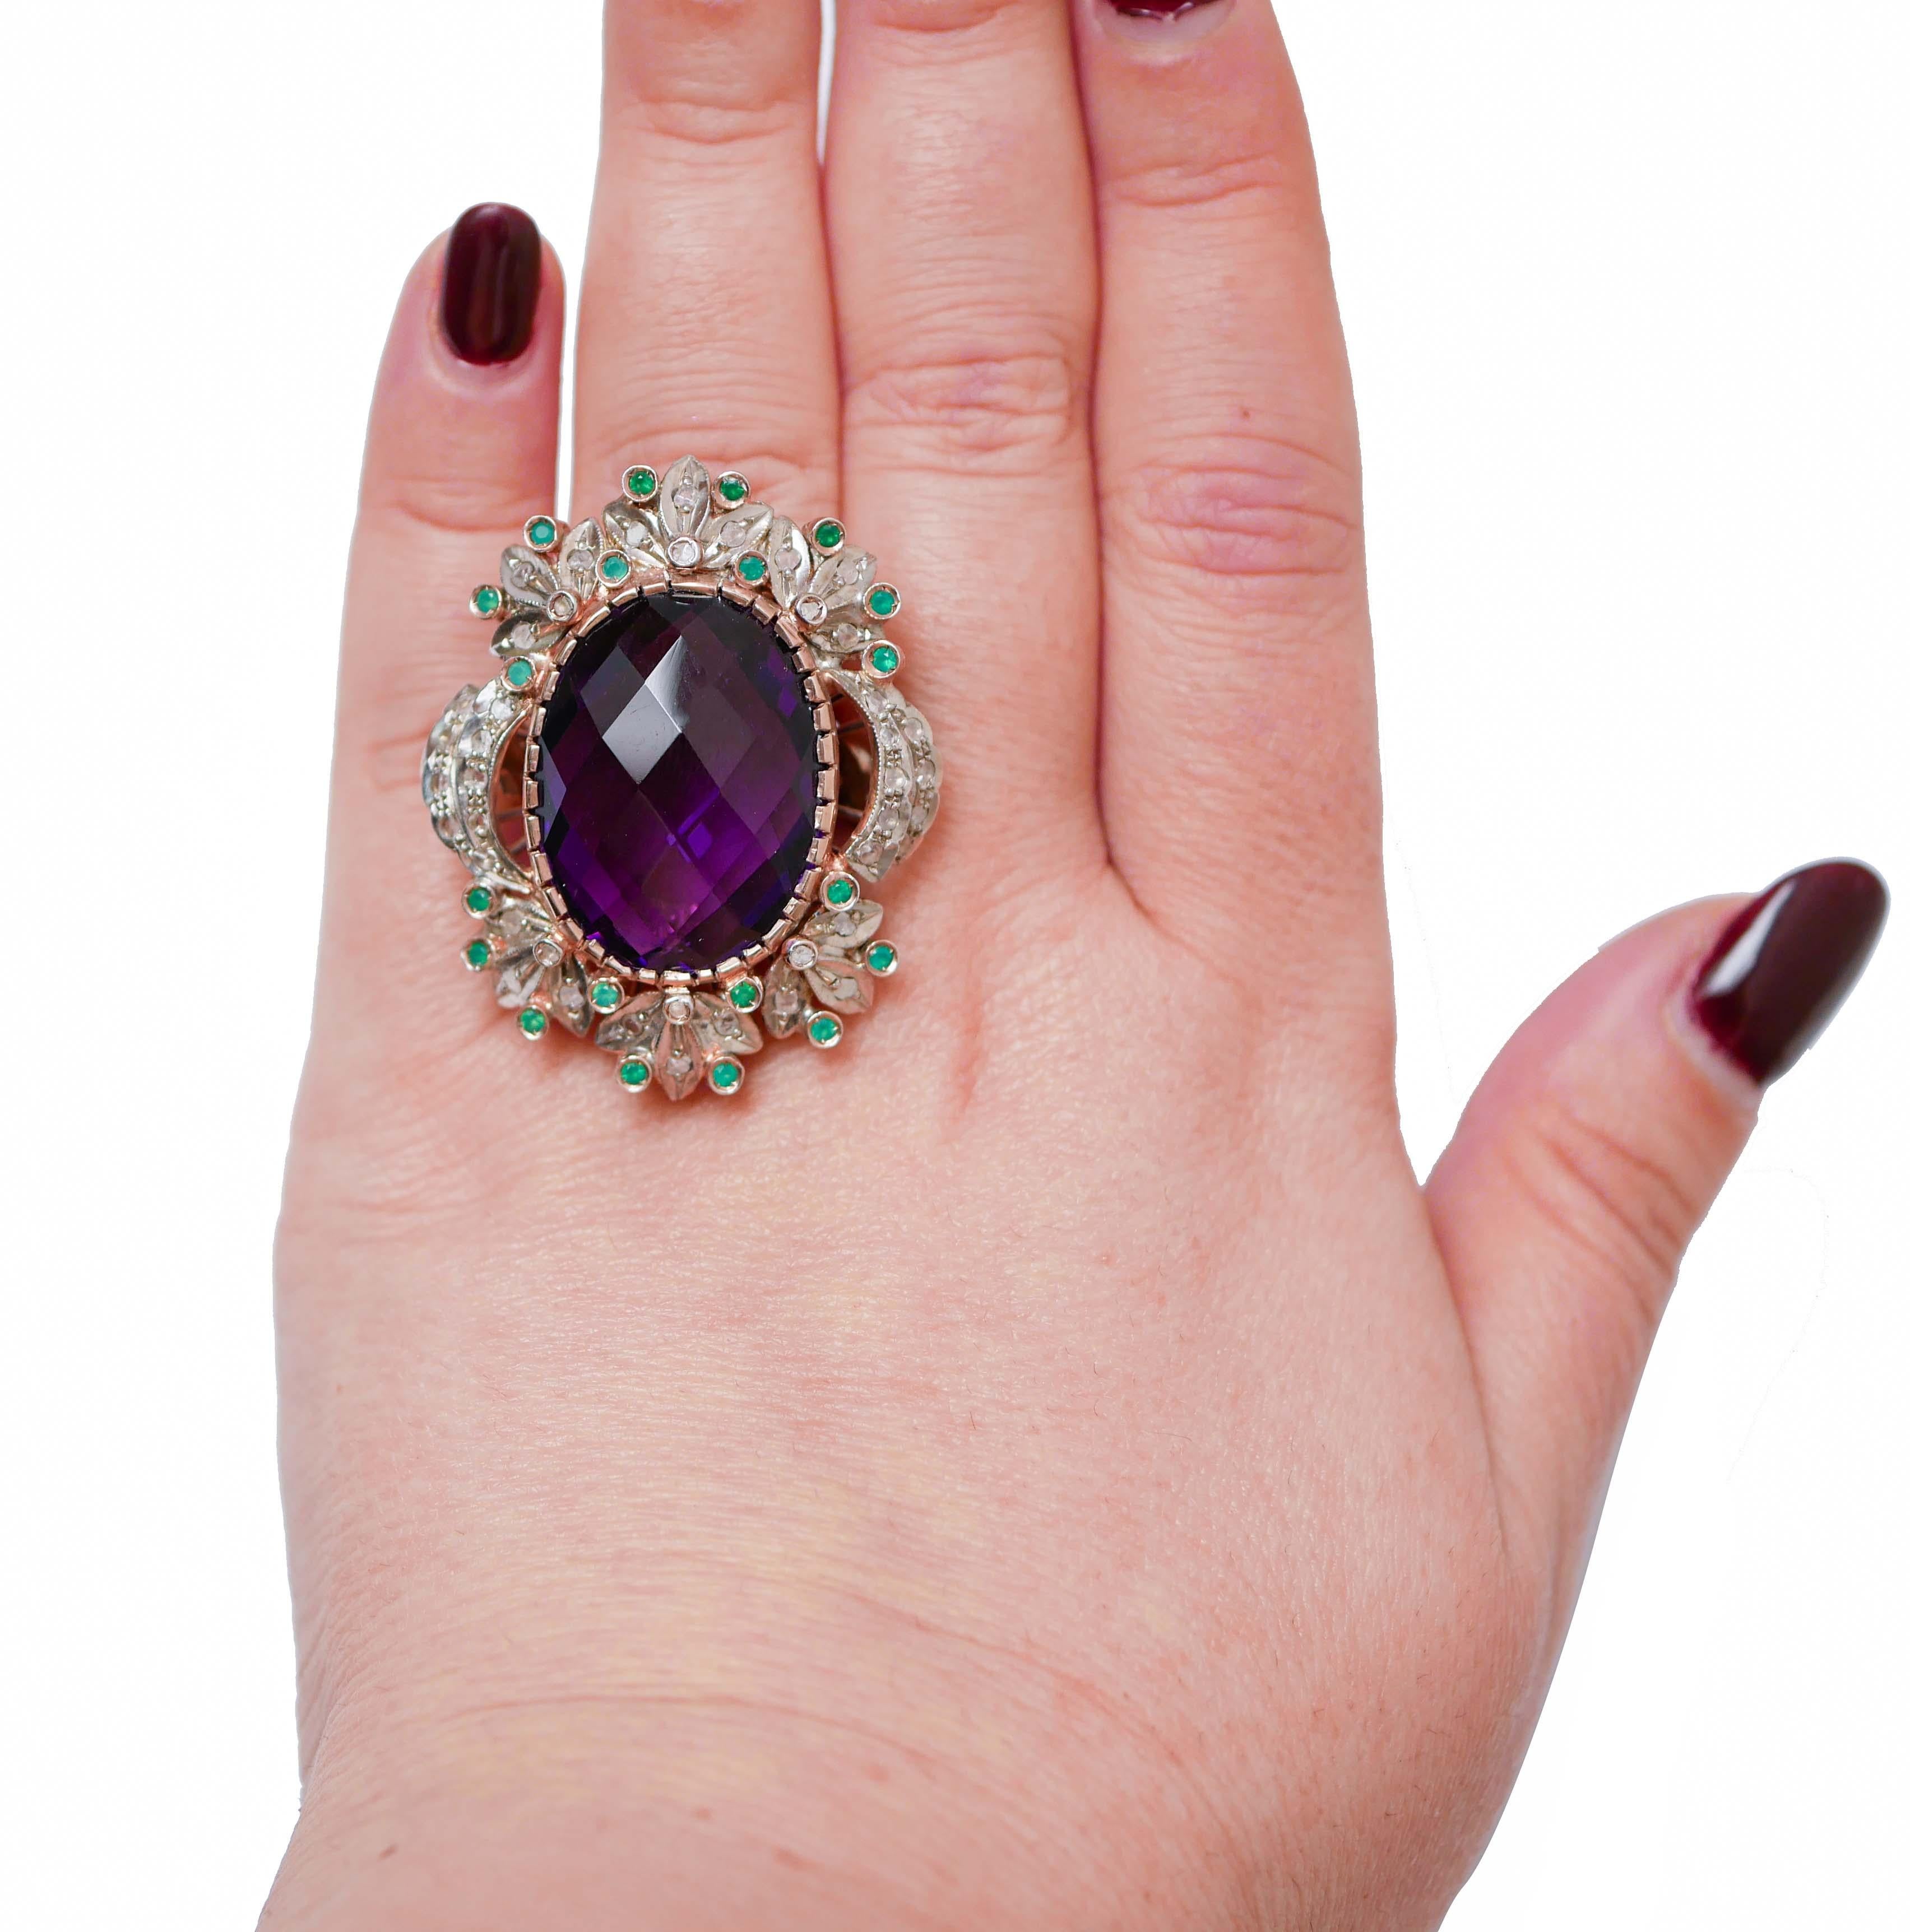 Mixed Cut Hydrothermal Amethyst, Green Agate, Diamonds, 14 Kt Rose Gold and Silver Ring. For Sale